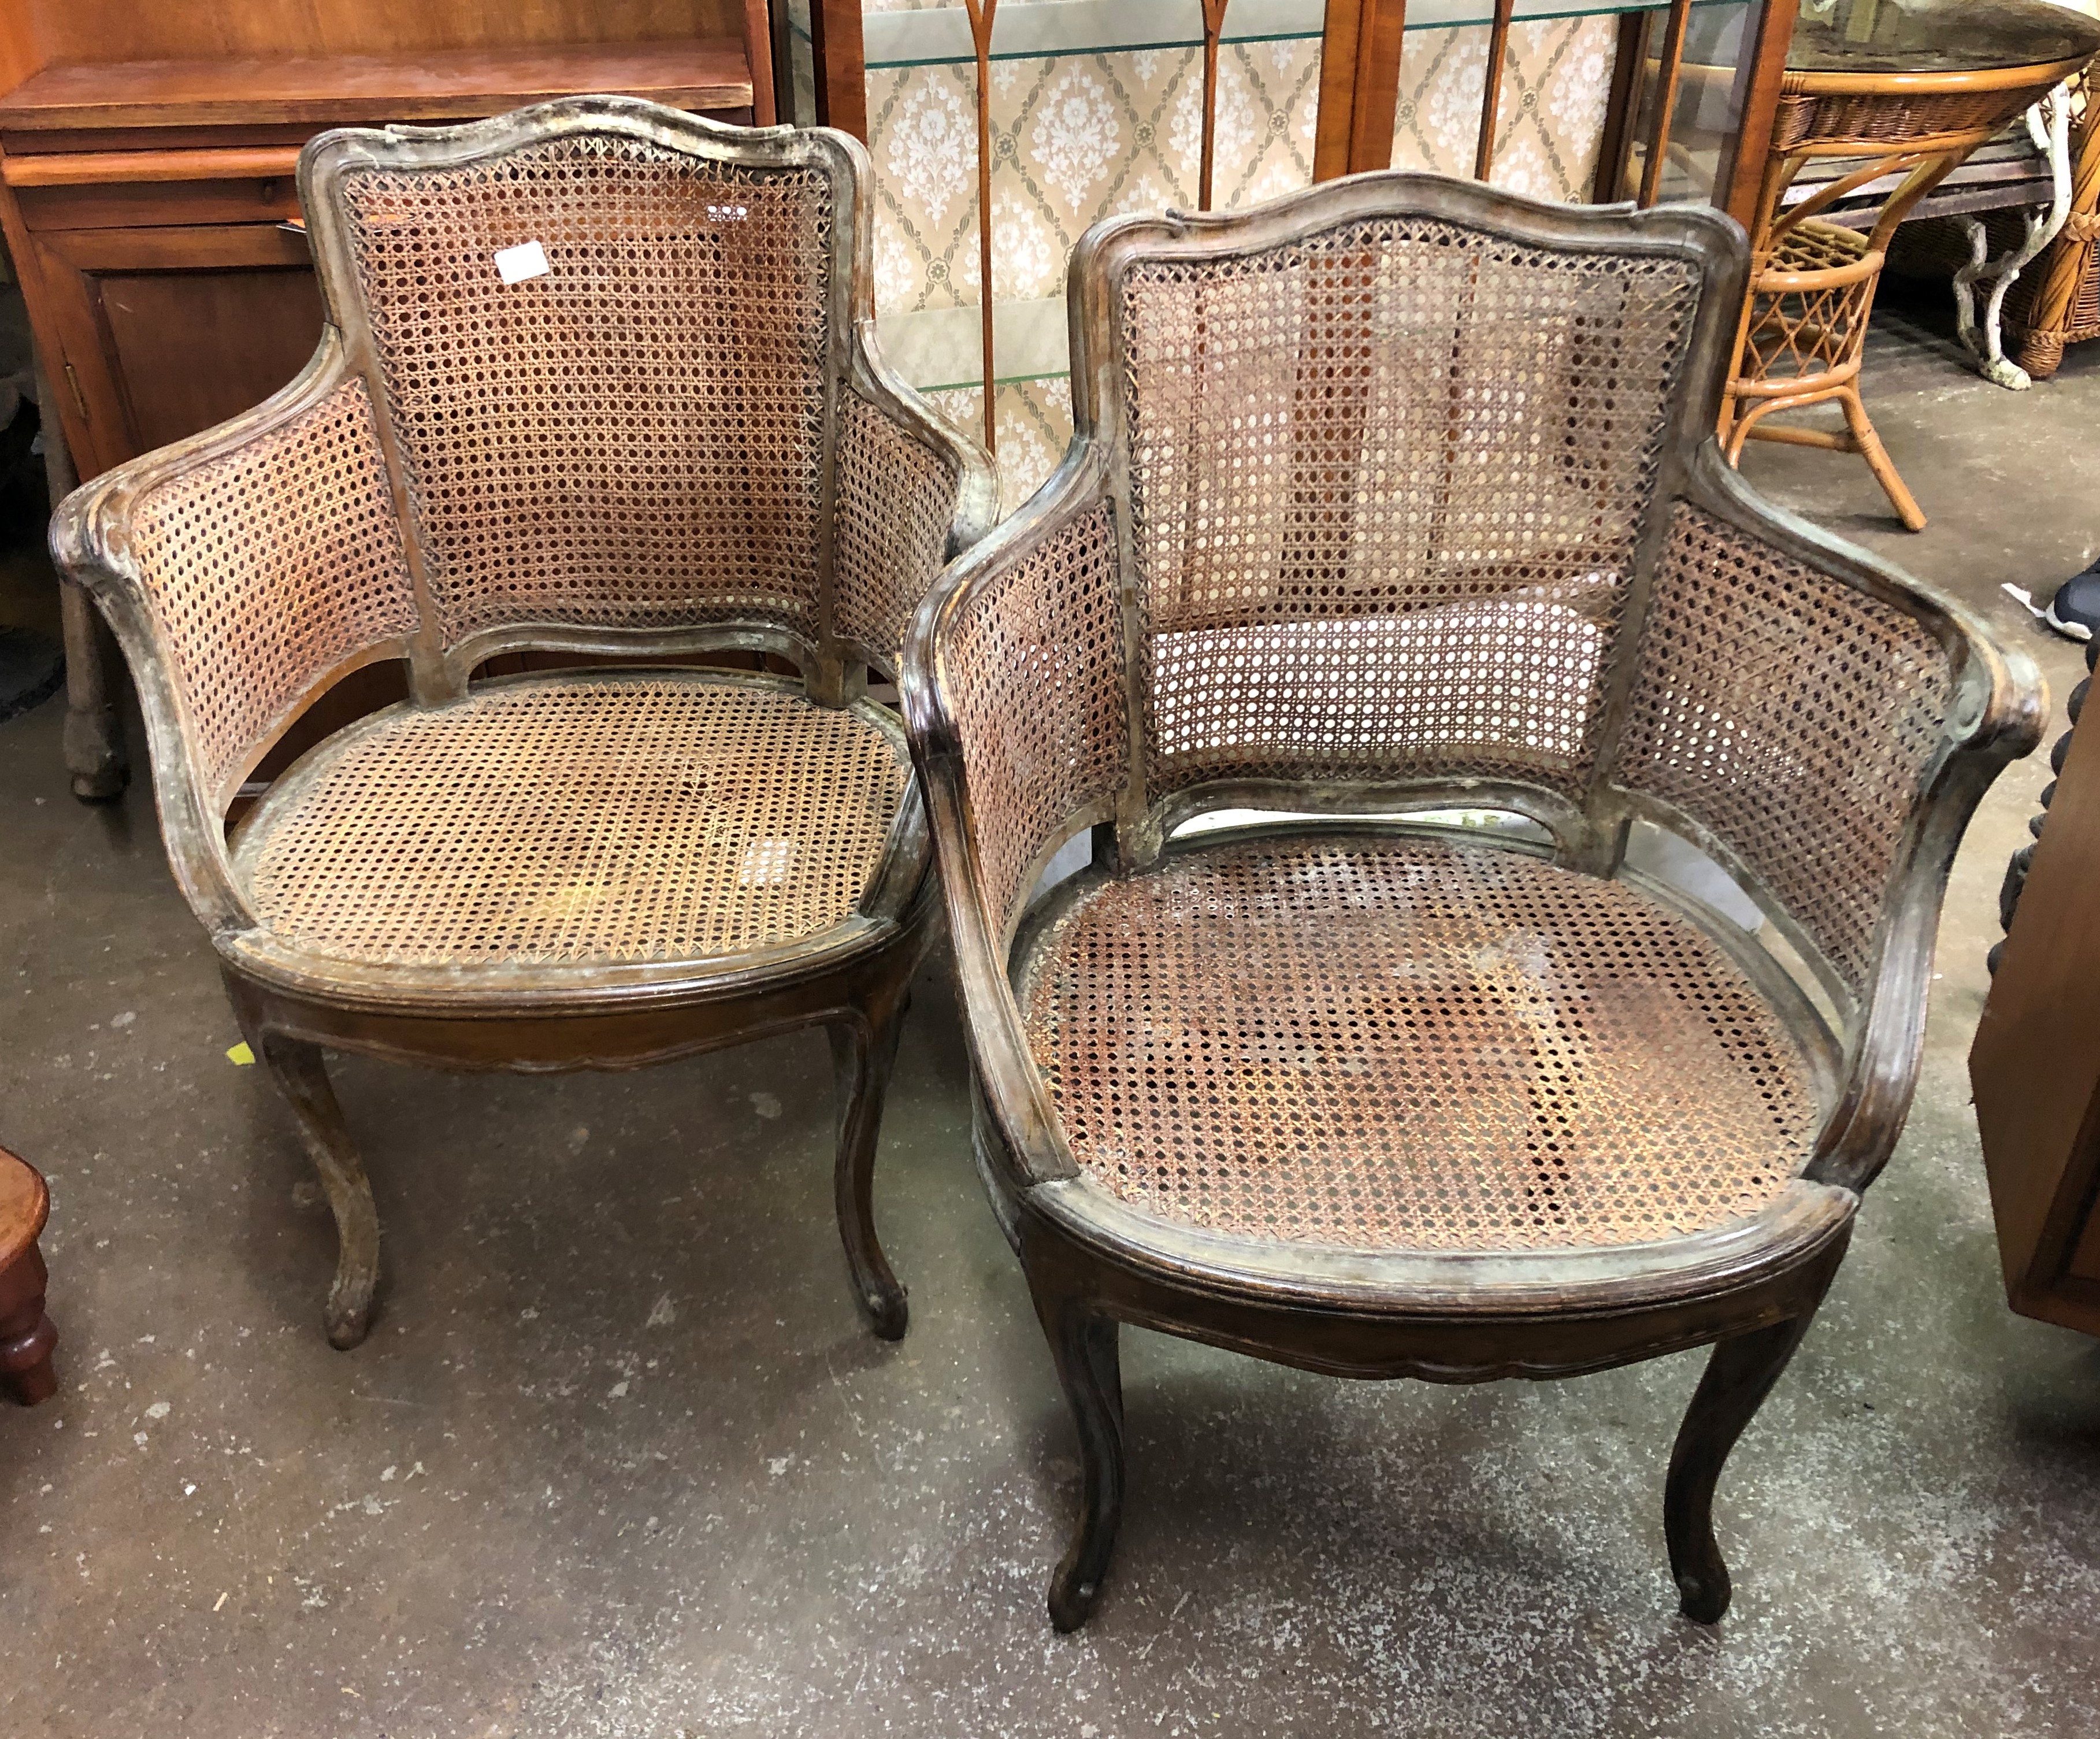 PAIR OF BEECH BERGERE CANED ELBOW CHAIRS MAKERS LABEL STAIR AND ANDREW SOHO SQUARE LONDON